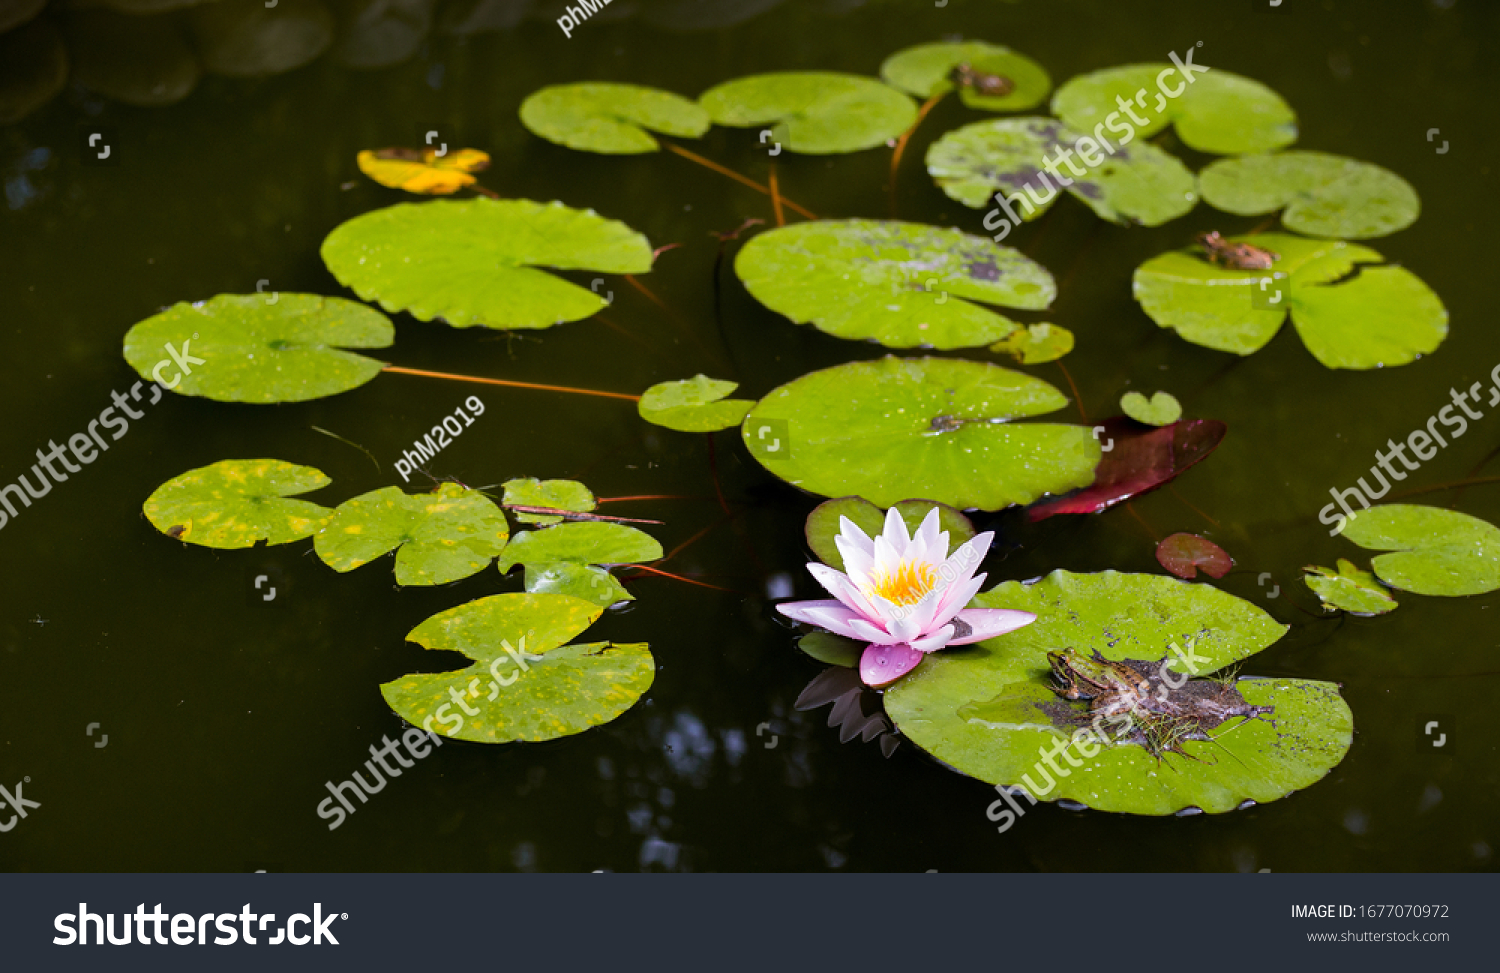 Lake with water-lily flowers on dark water. Beautiful pink water lily, Flower blooming #1677070972